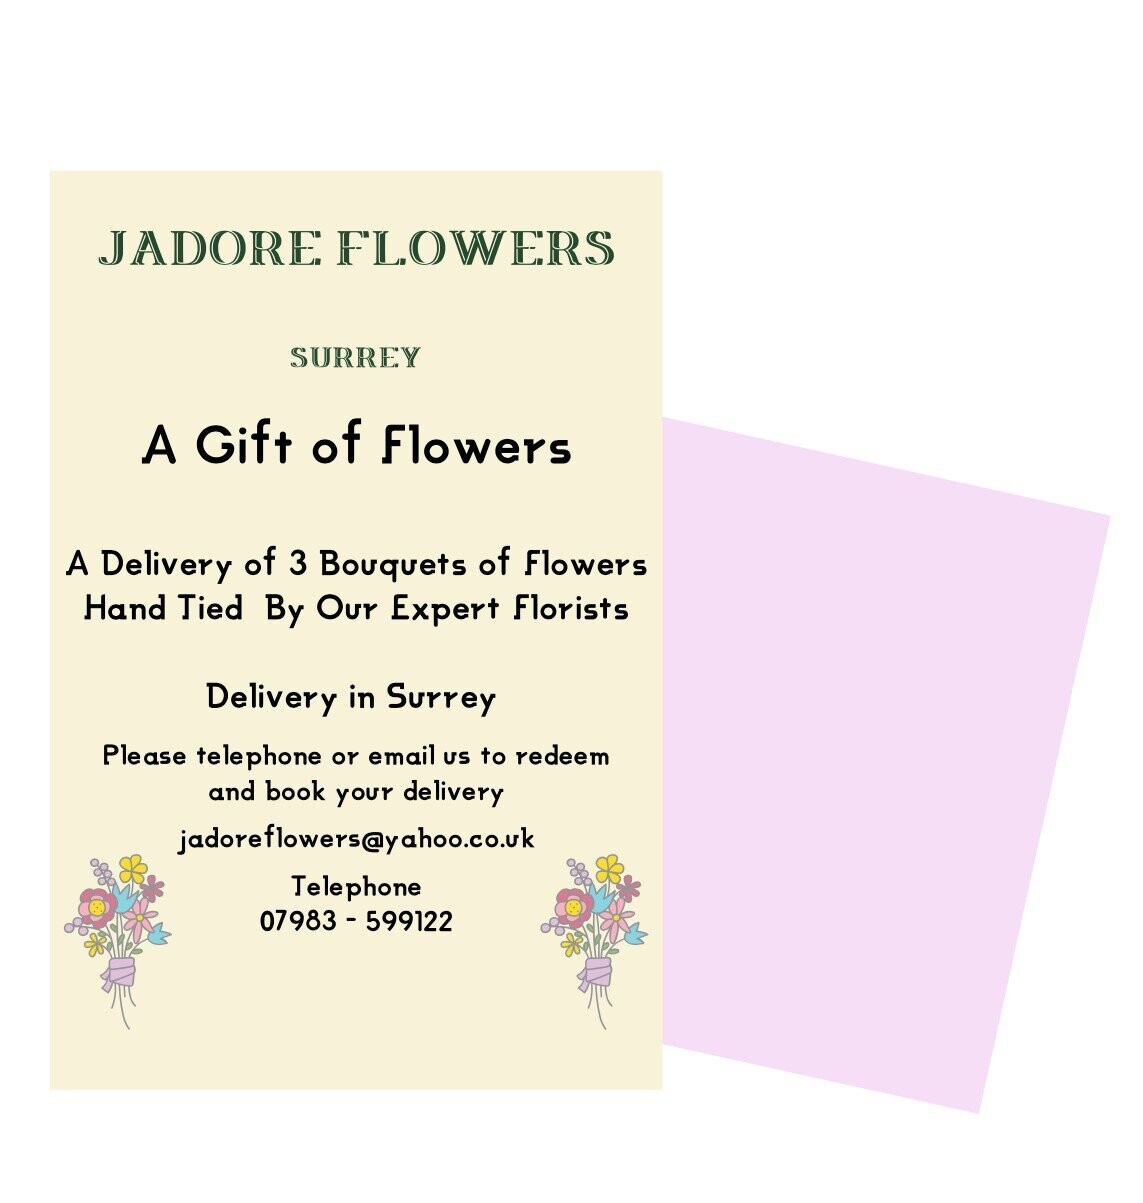 The Gift Of Flowers x3 Bouquets Voucher